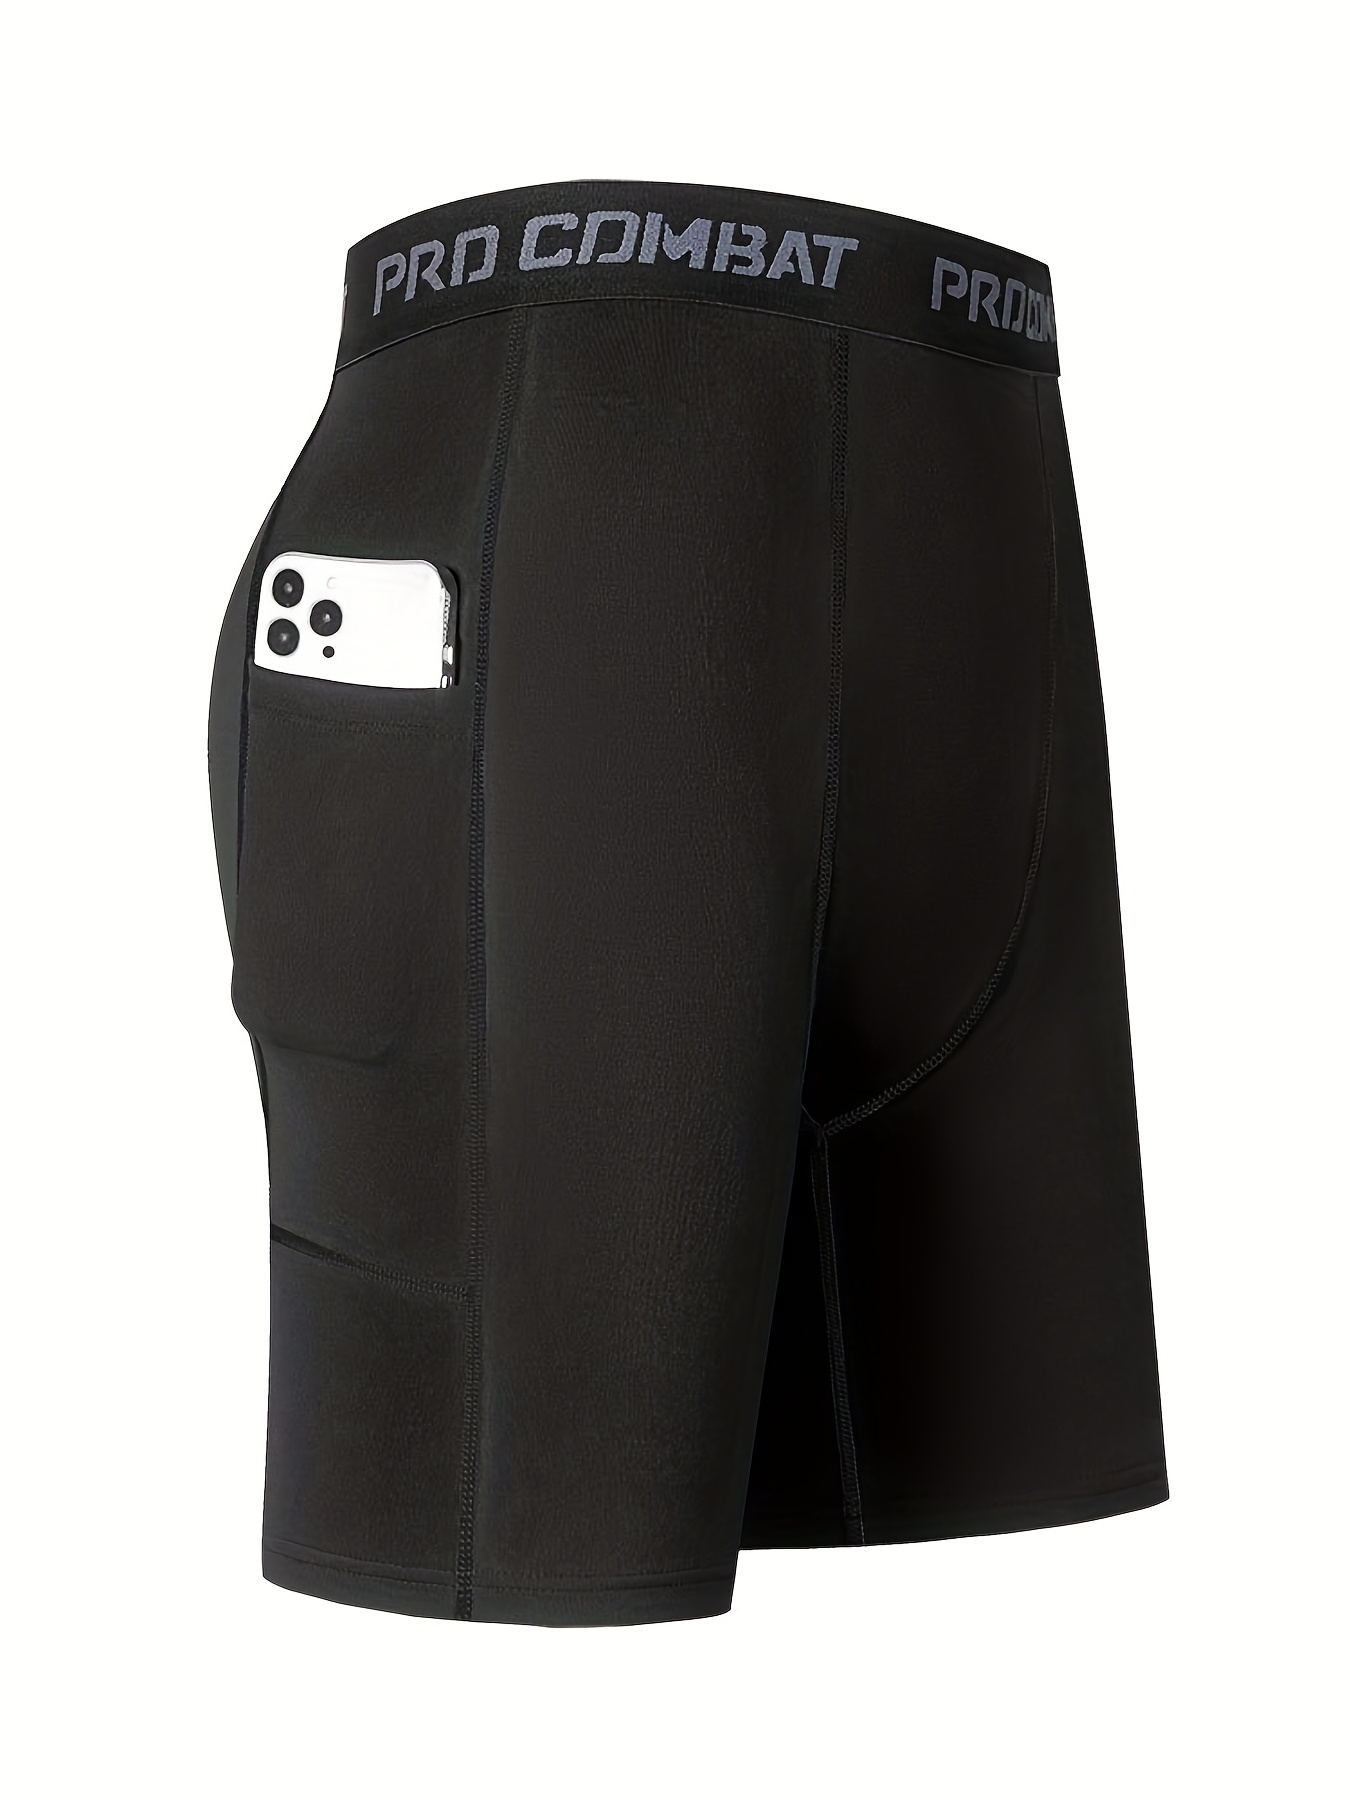 Best Compression Shorts for Combat Sports